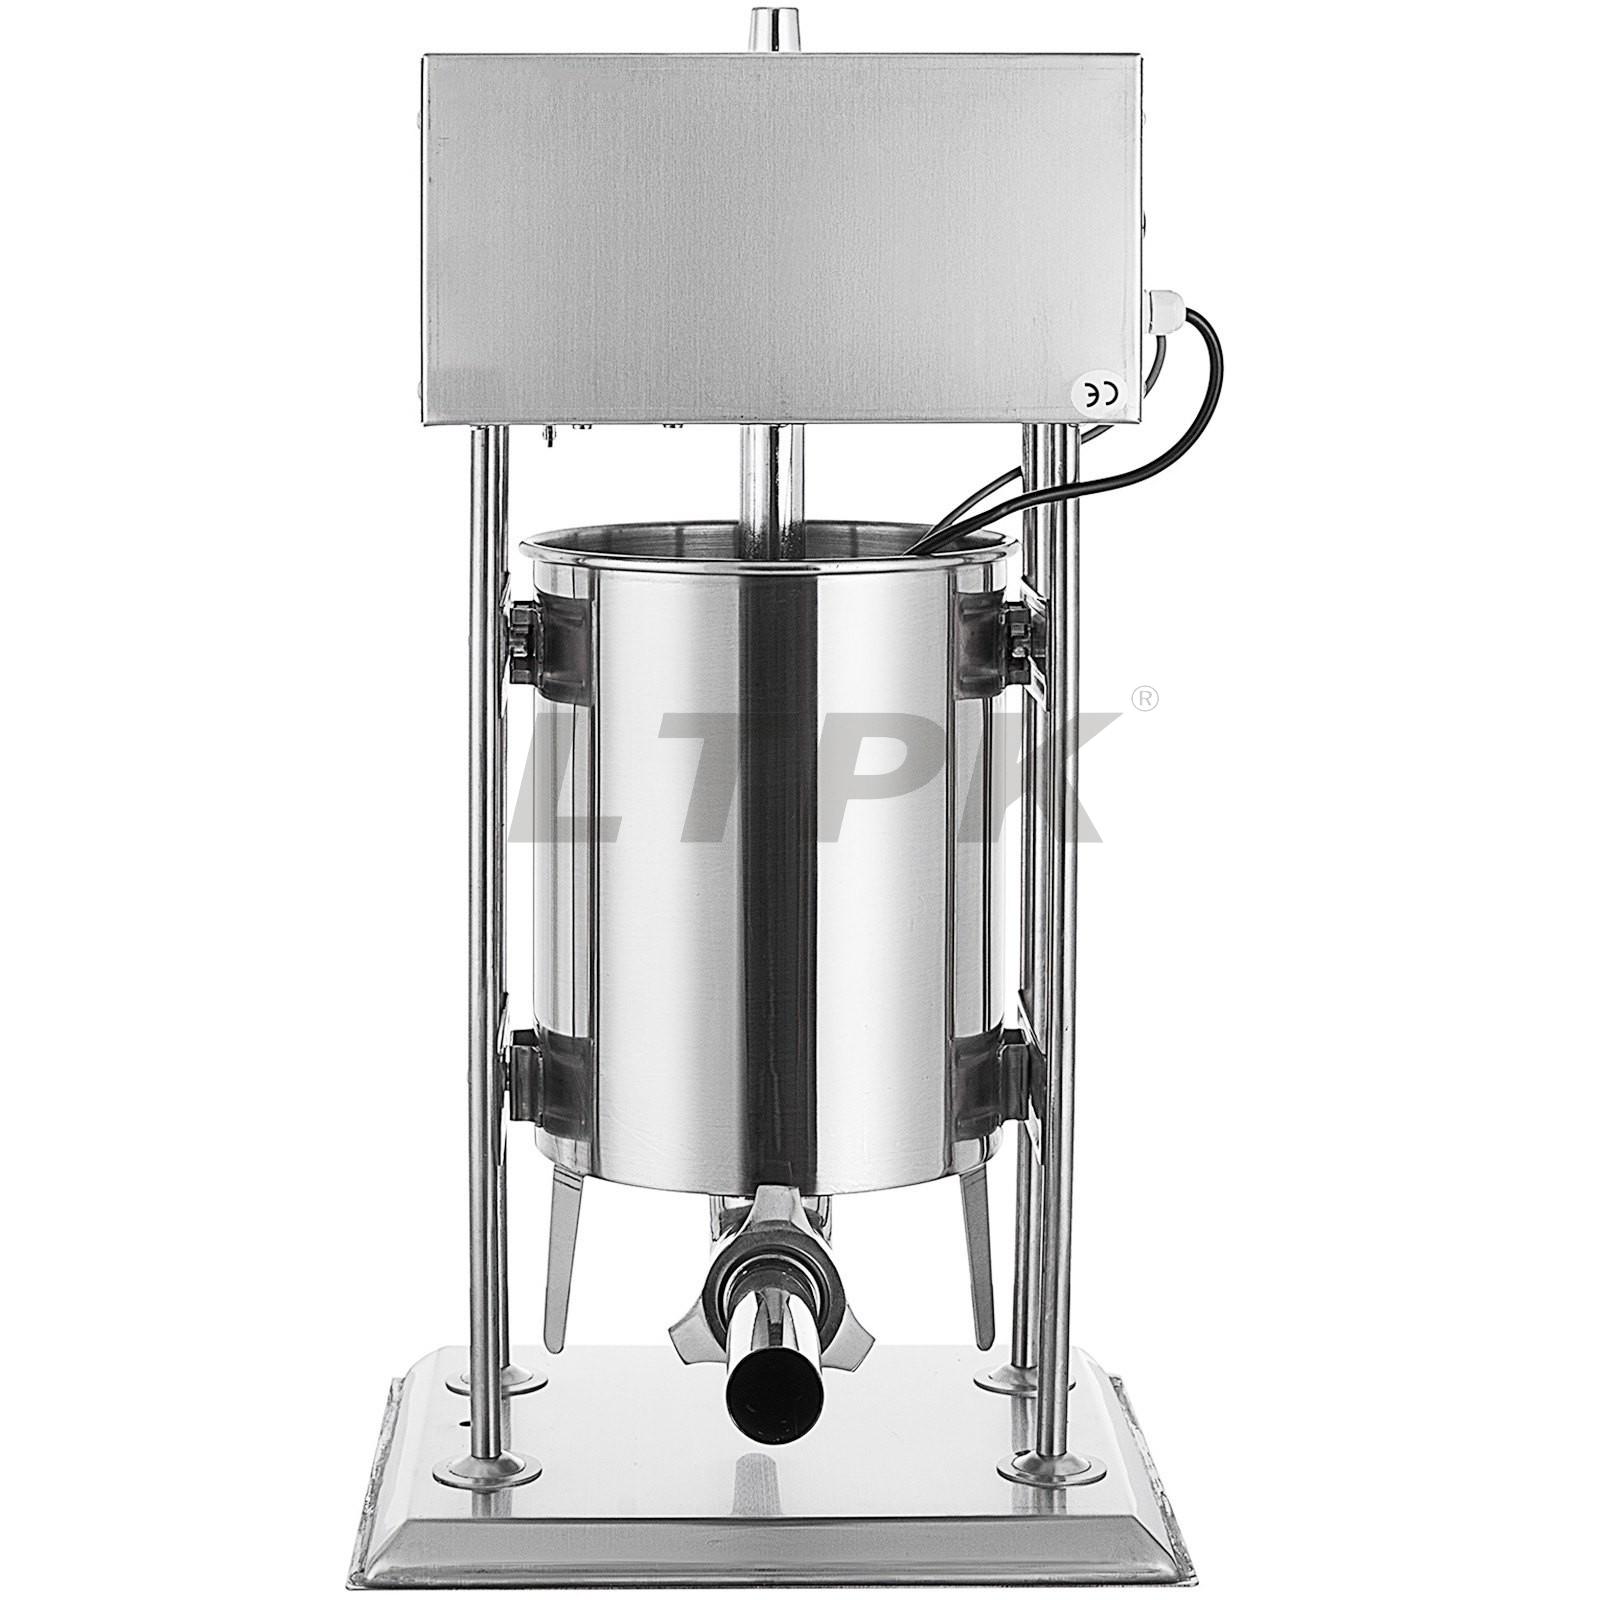 15L Automatic Sausages Maker Machine with 4 Filling Funnels